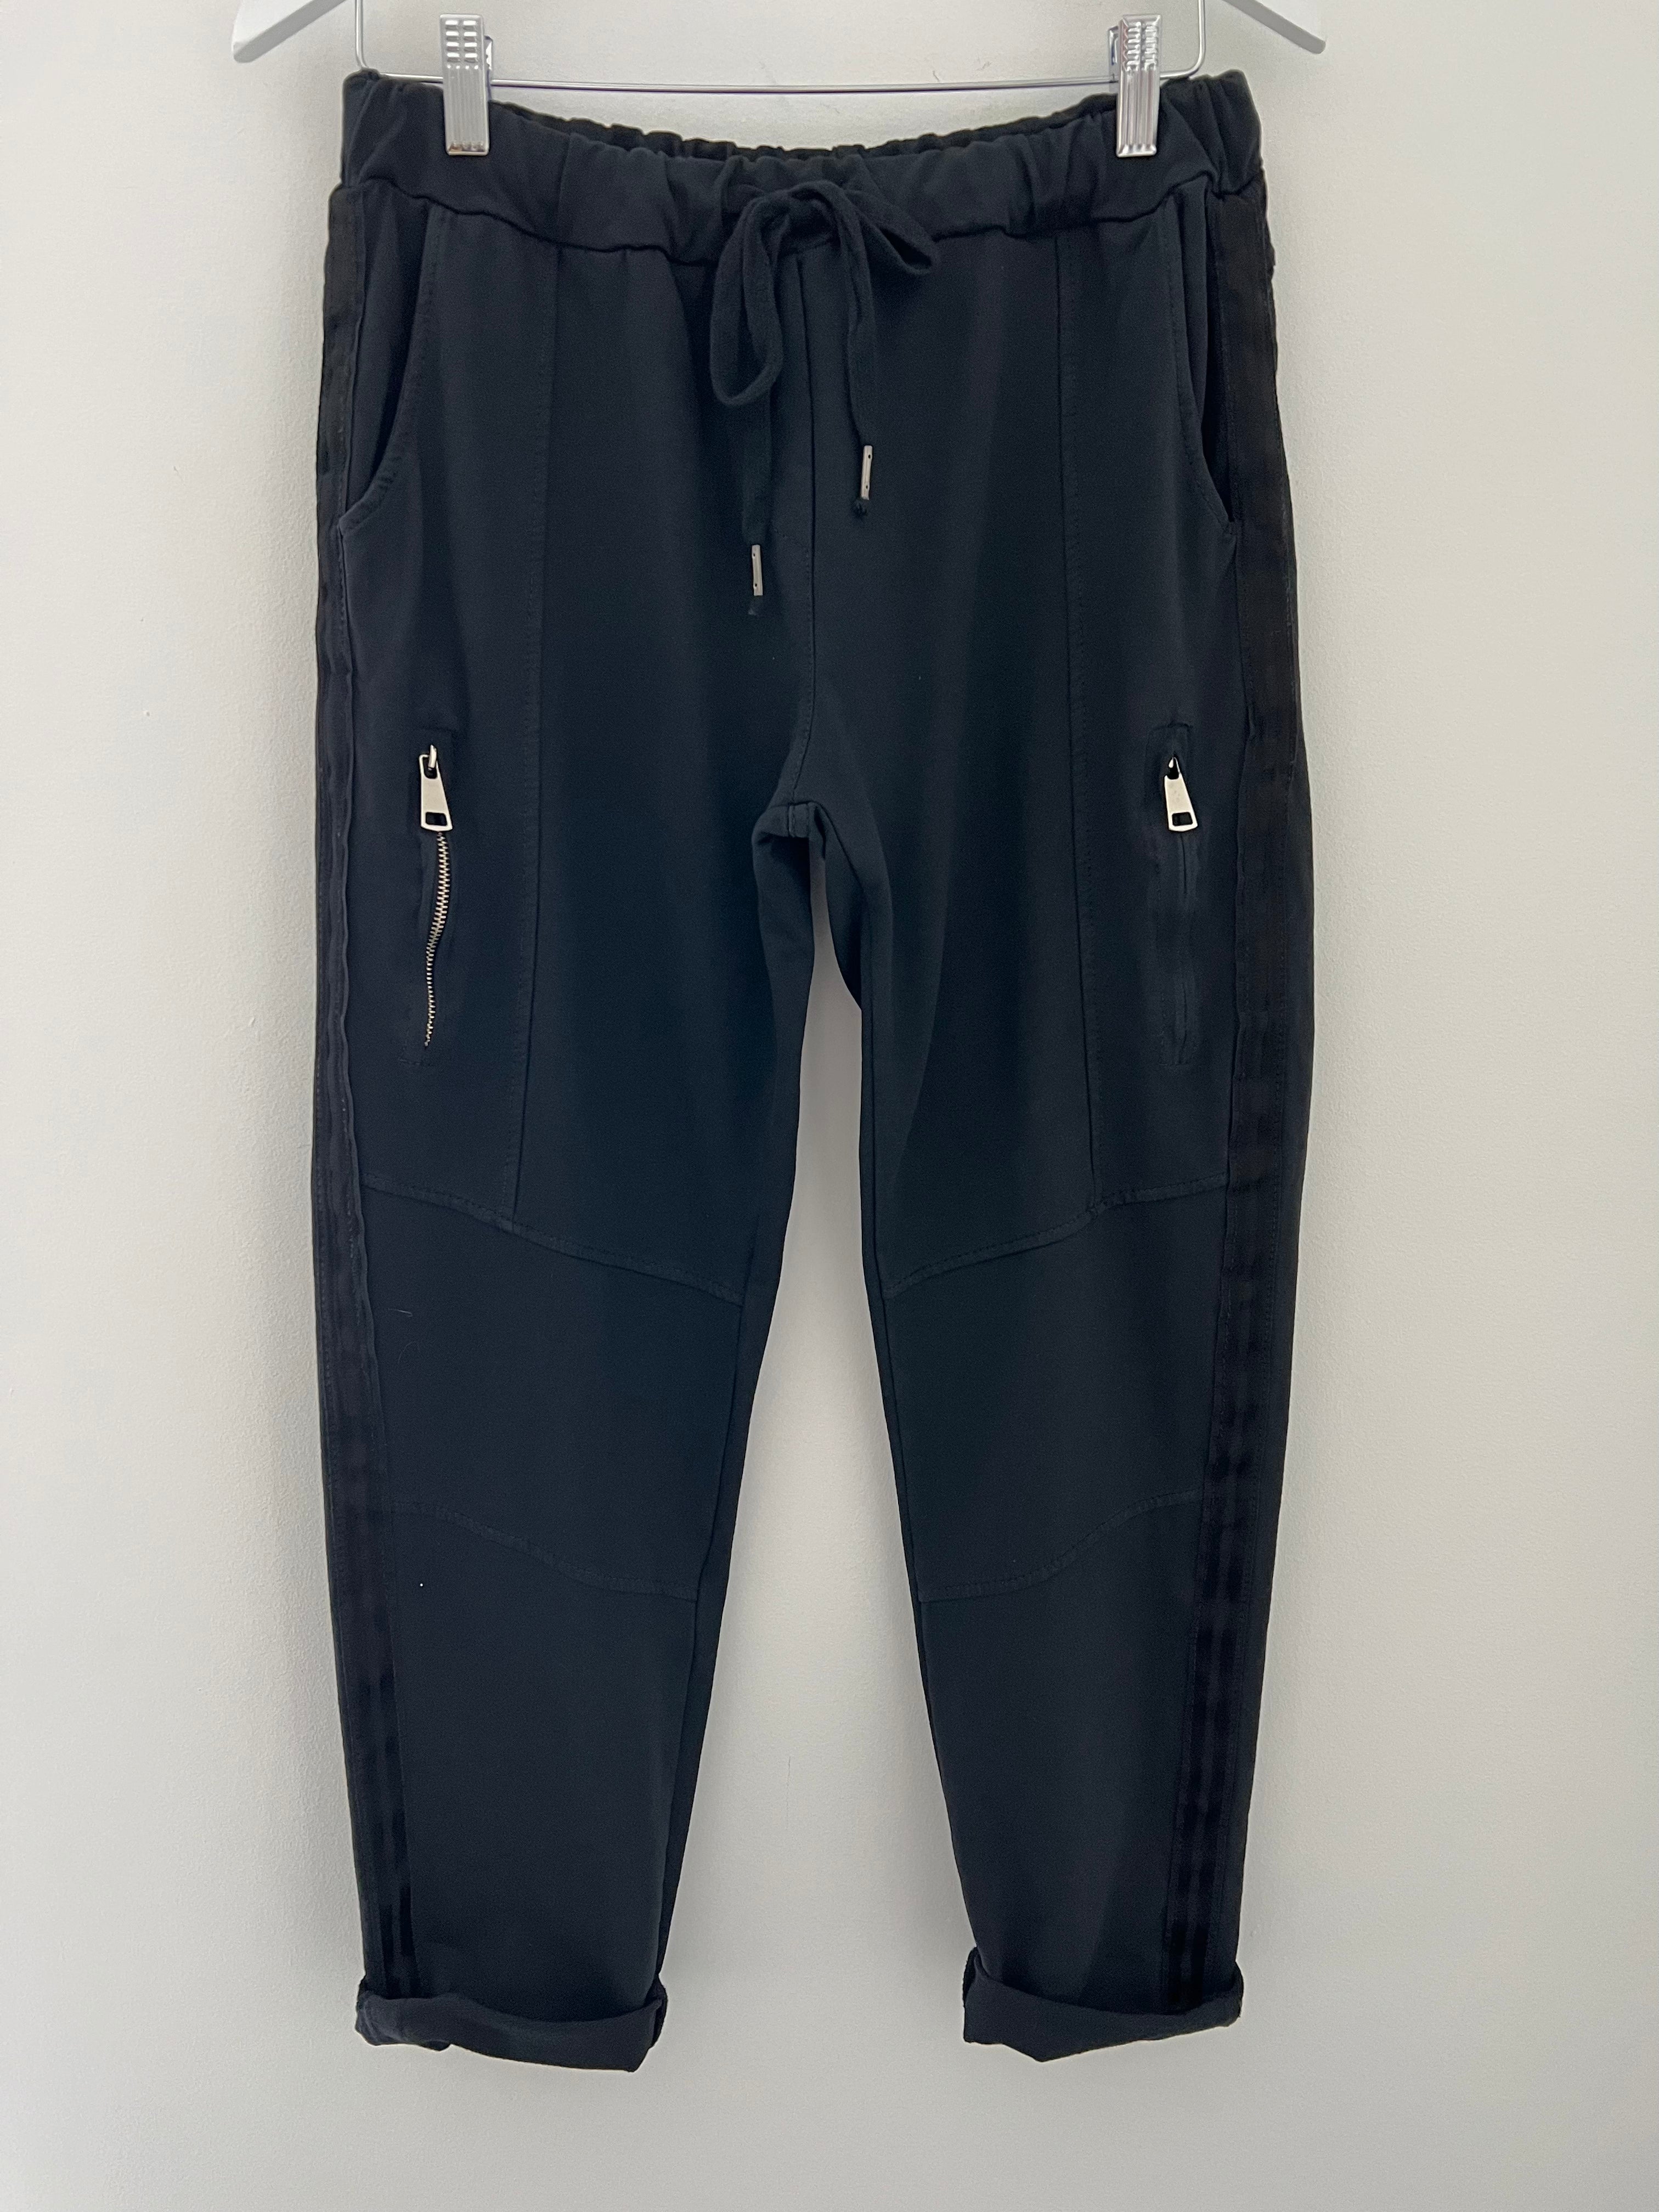 Jersey Stretch Joggers in Black